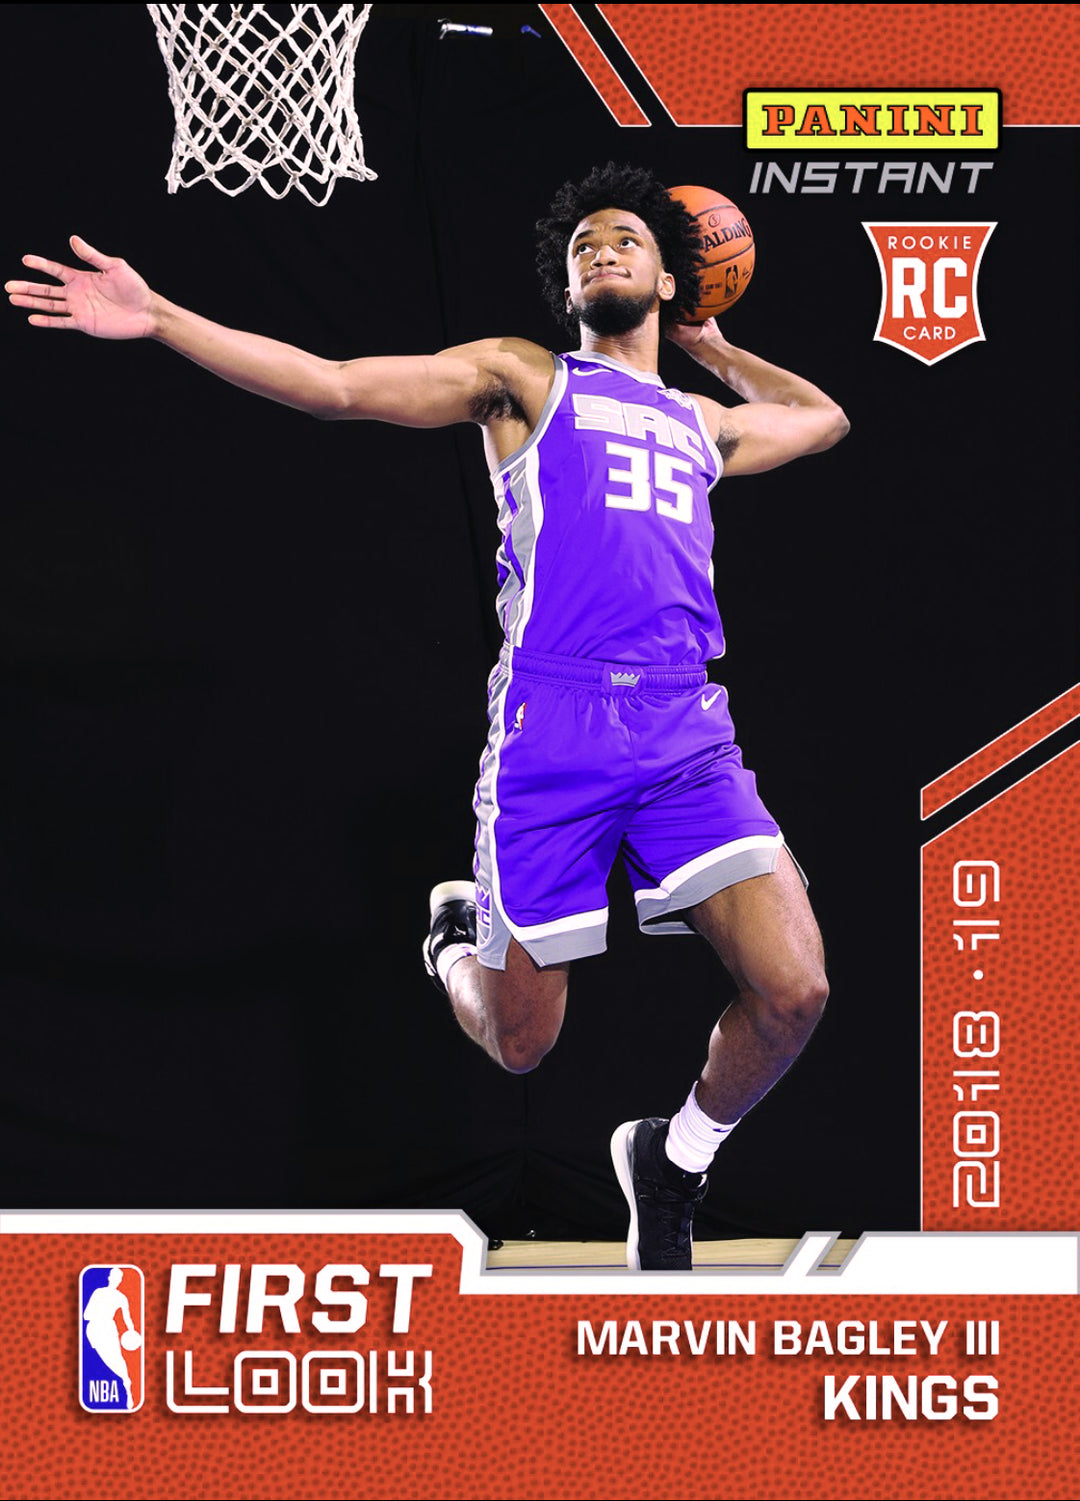 2018 MARVIN BAGLEY SACRAMENTO KINGS FIRST LOOK PANINI INSTANT ROOKIE CARD #FL-2 Image 1